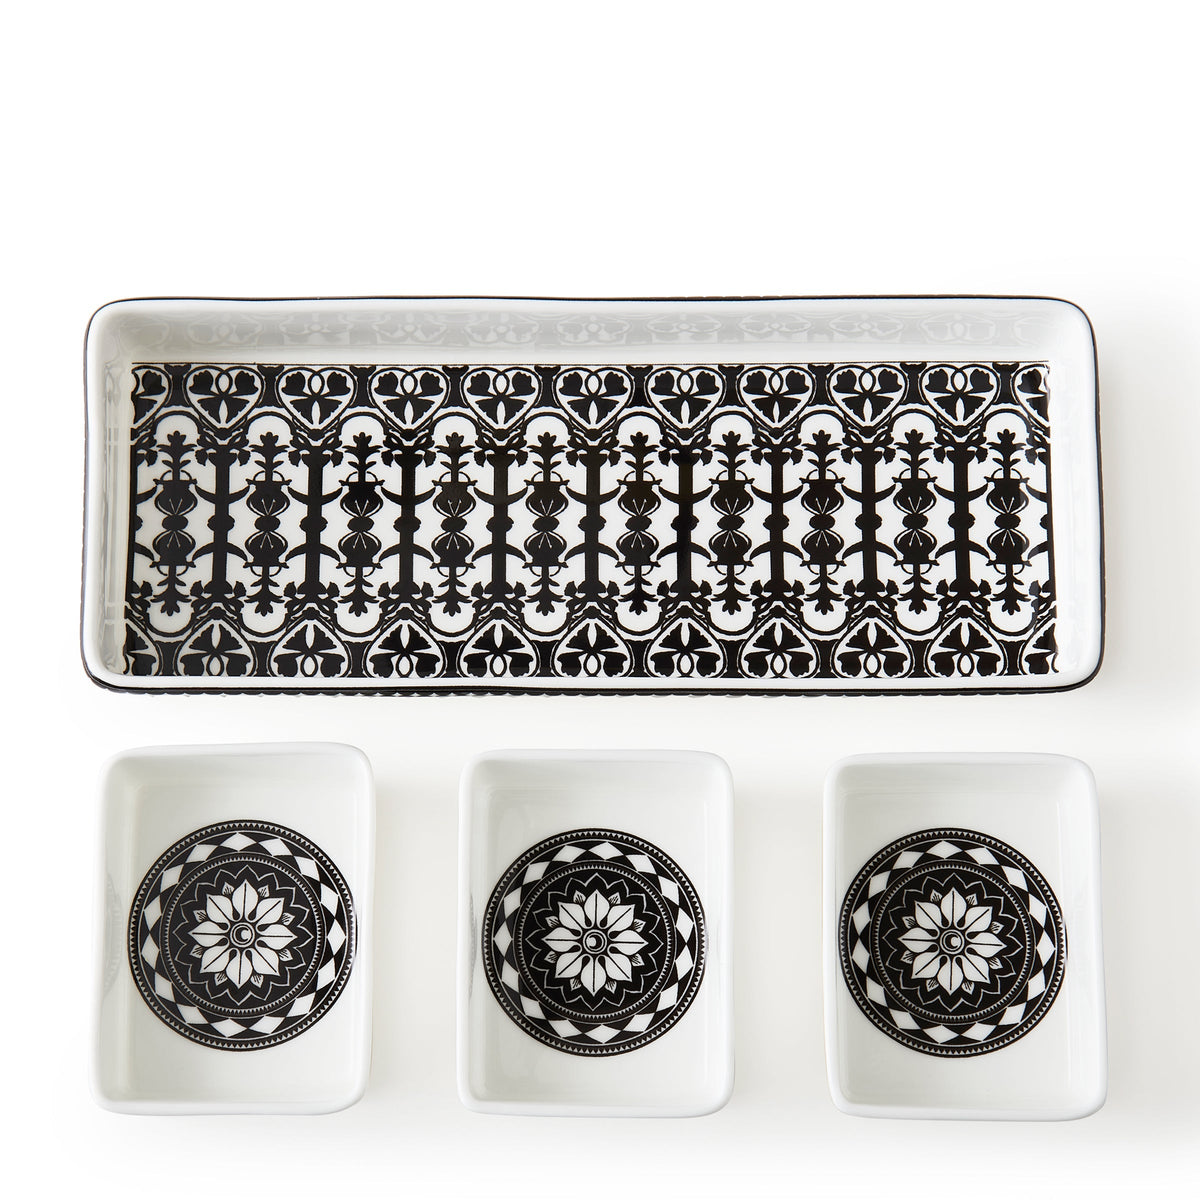 A Casablanca nested tray set by Caskata featuring three bone china bowls, all elegantly displayed in black and white. Perfect for serving a variety of delicious dishes.